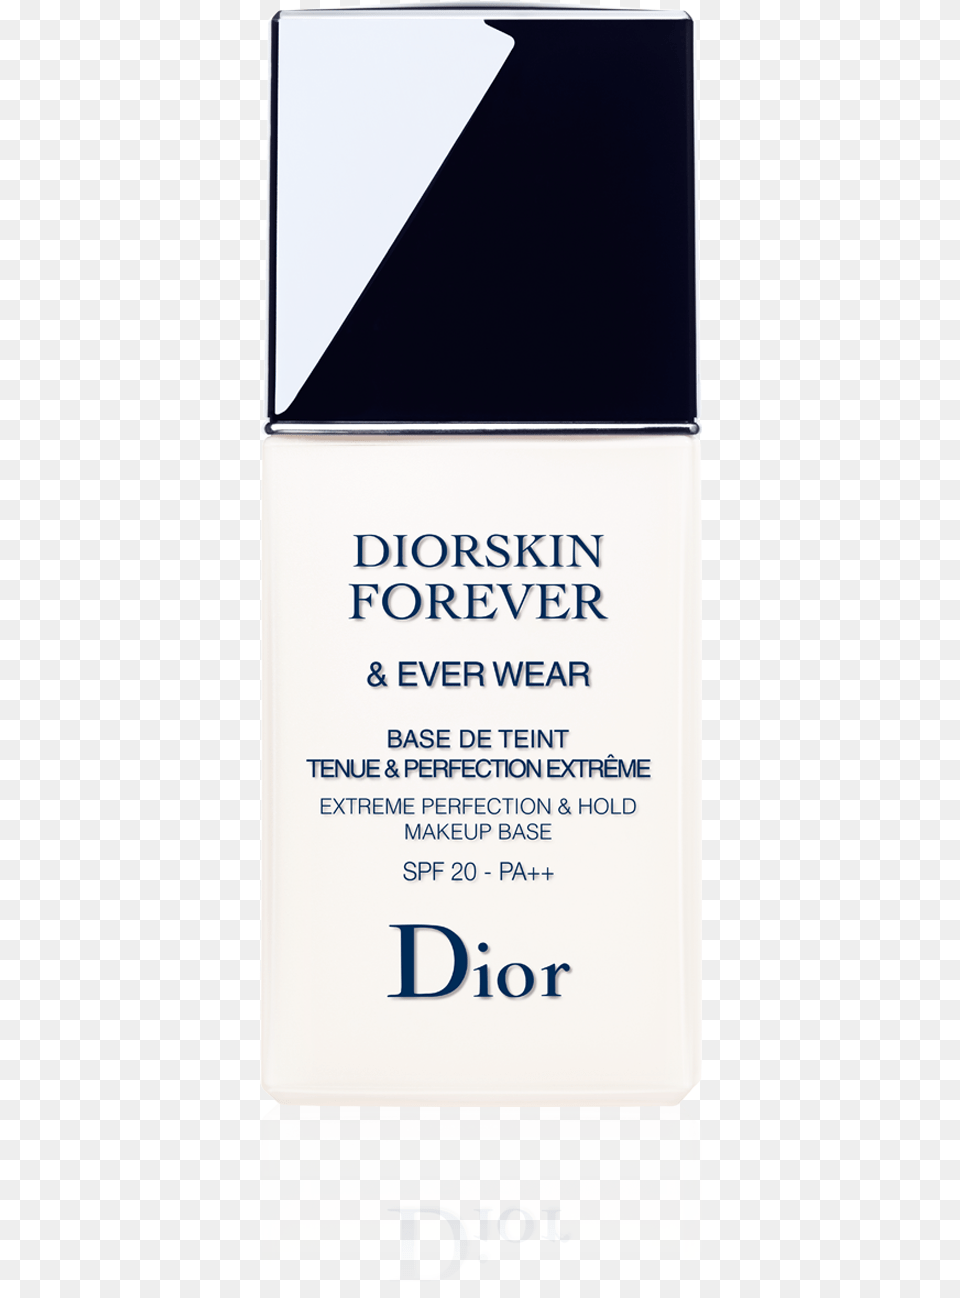 Diorskin Forever Amp Ever Wear Extreme Perfection Amp Hold, Bottle, Cosmetics, Blackboard Png